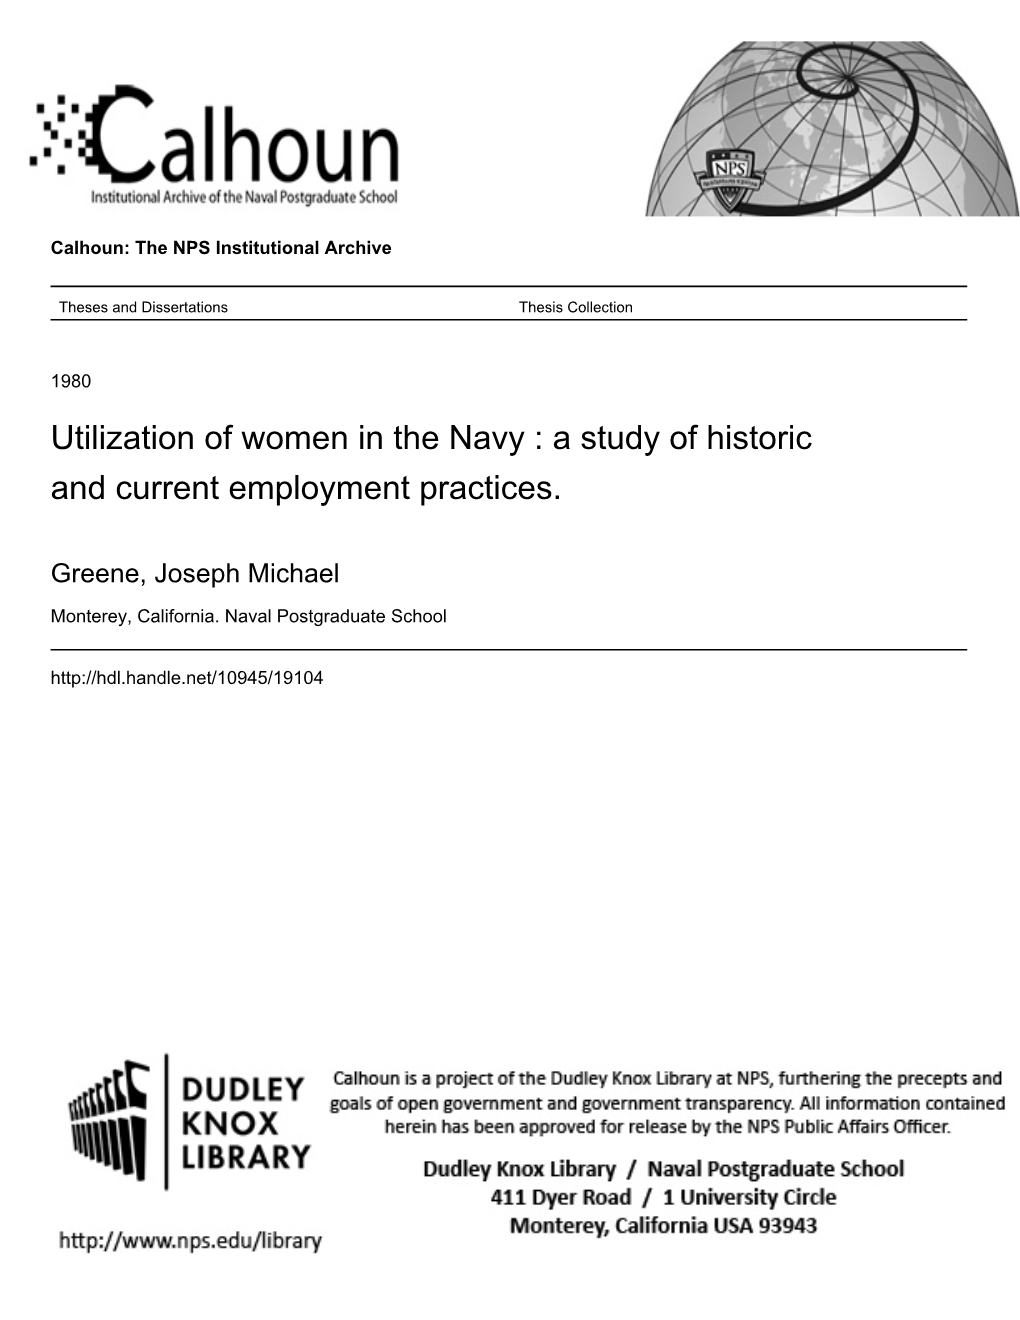 Utilization of Women in the Navy : a Study of Historic and Current Employment Practices